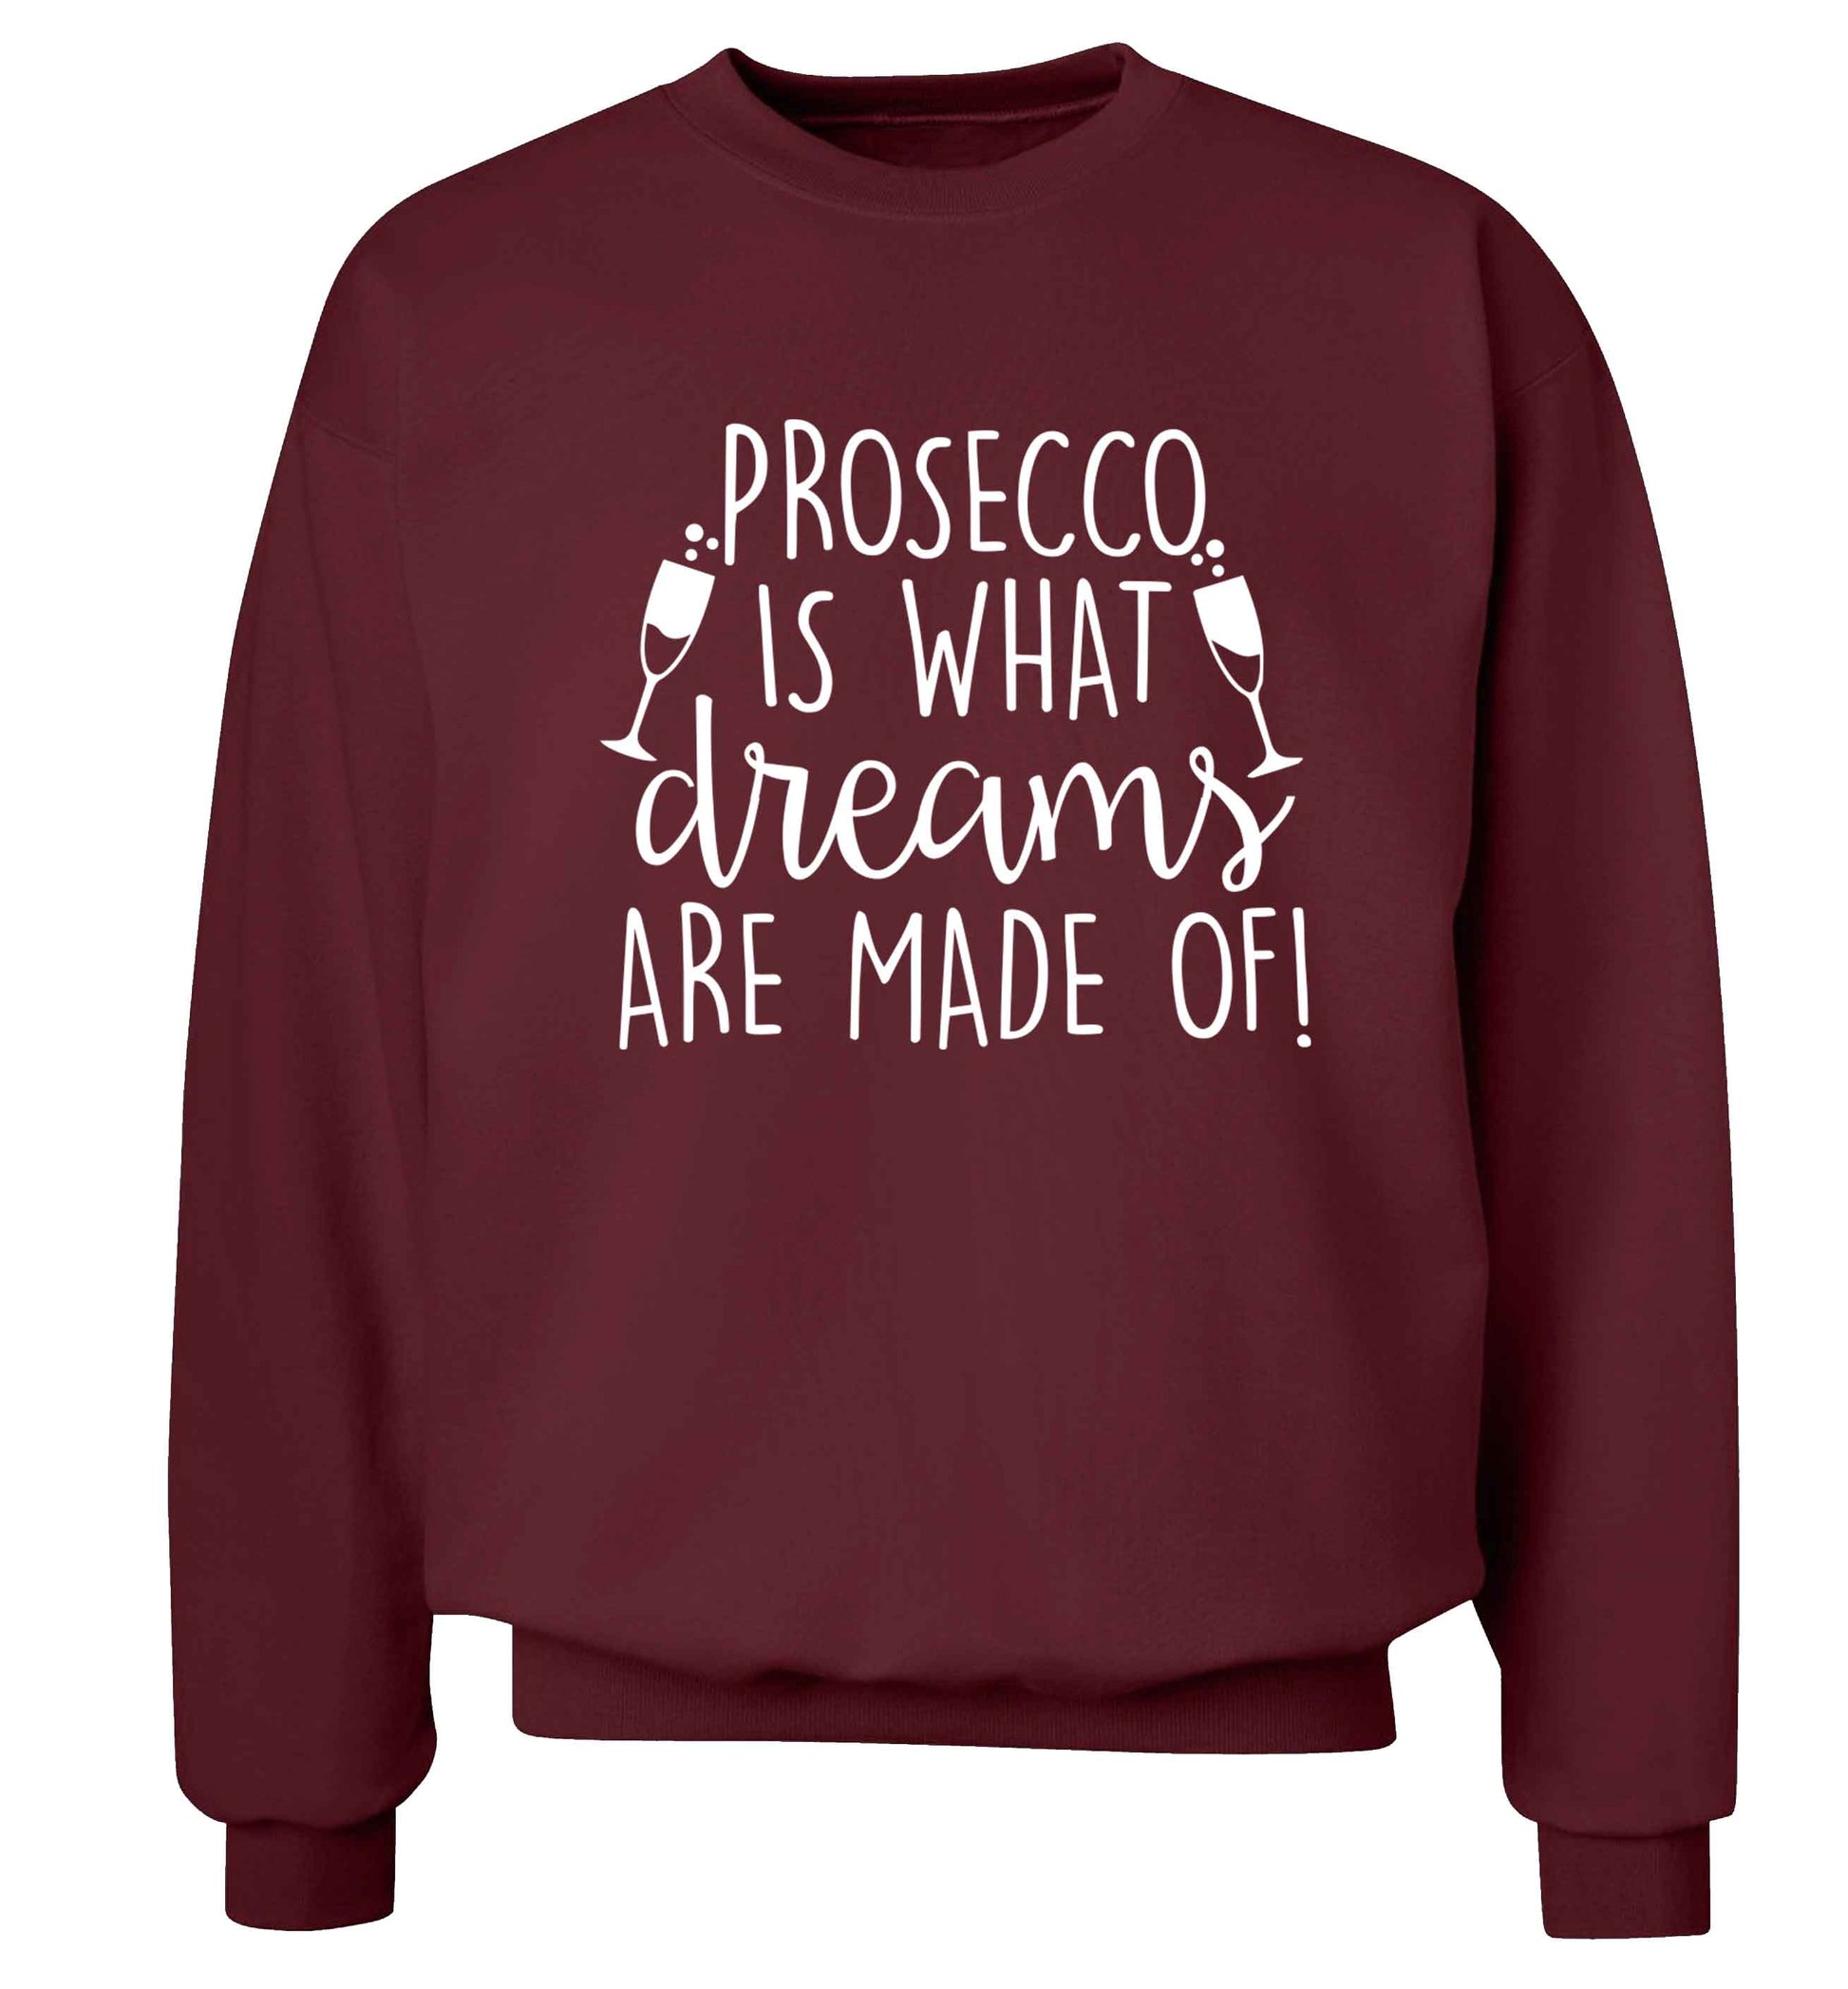 Prosecco is what dreams are made of Adult's unisex maroon Sweater 2XL